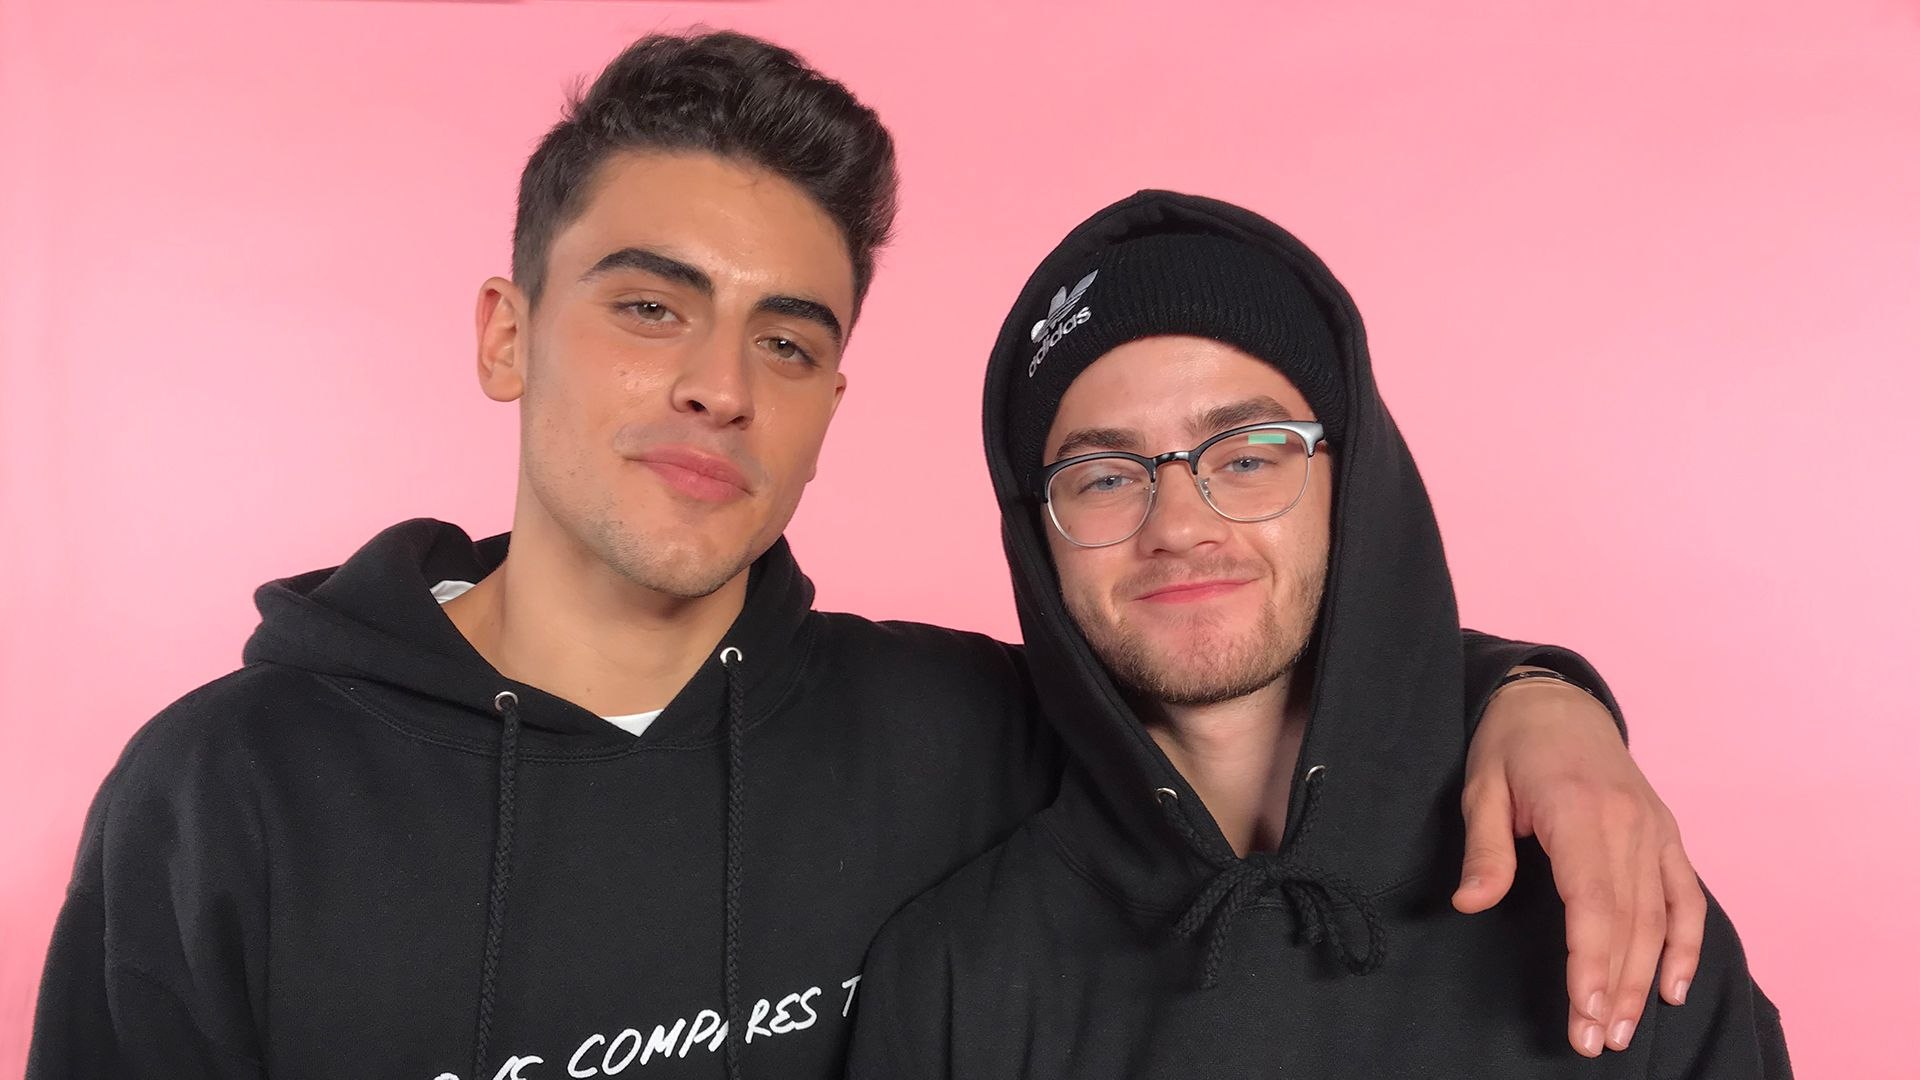 Watch the pop-rap duo 'Jack & Jack' Share Embarrassing Stories with Emojis  - video Dailymotion